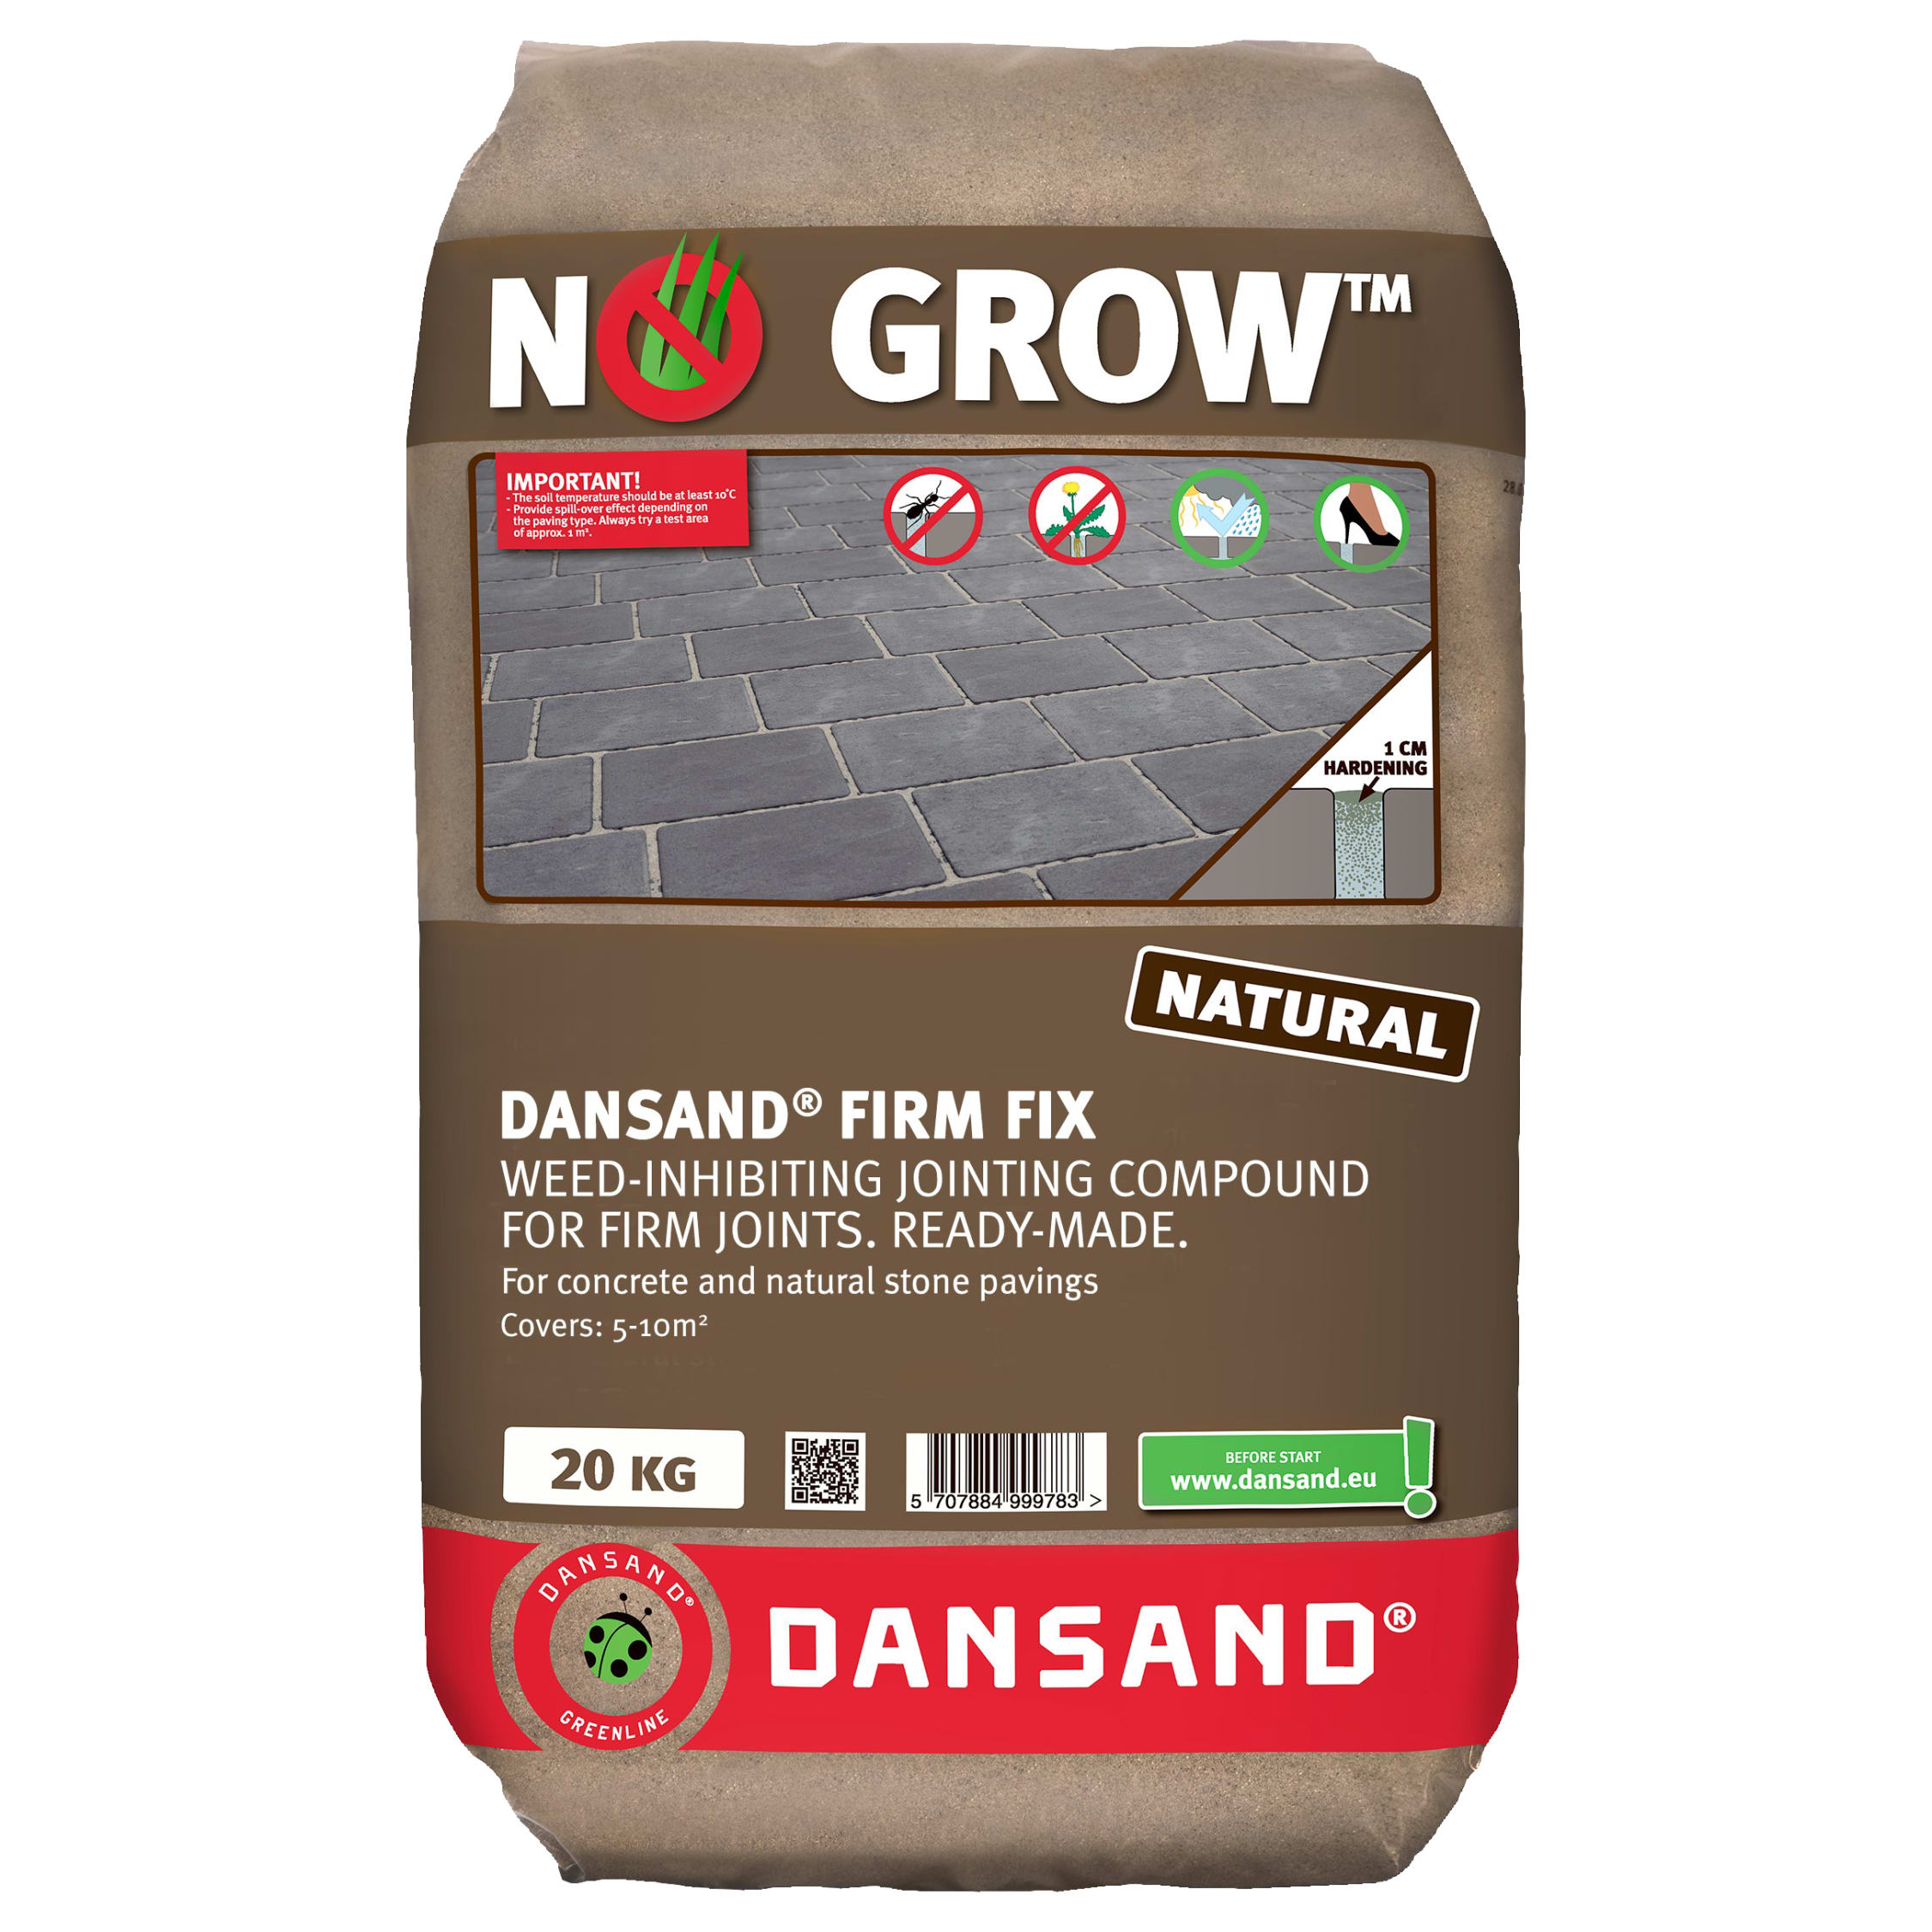 Dansand Stone Dust For Paving Wide Joints No Weed Joint Filler 20KG-200KG 